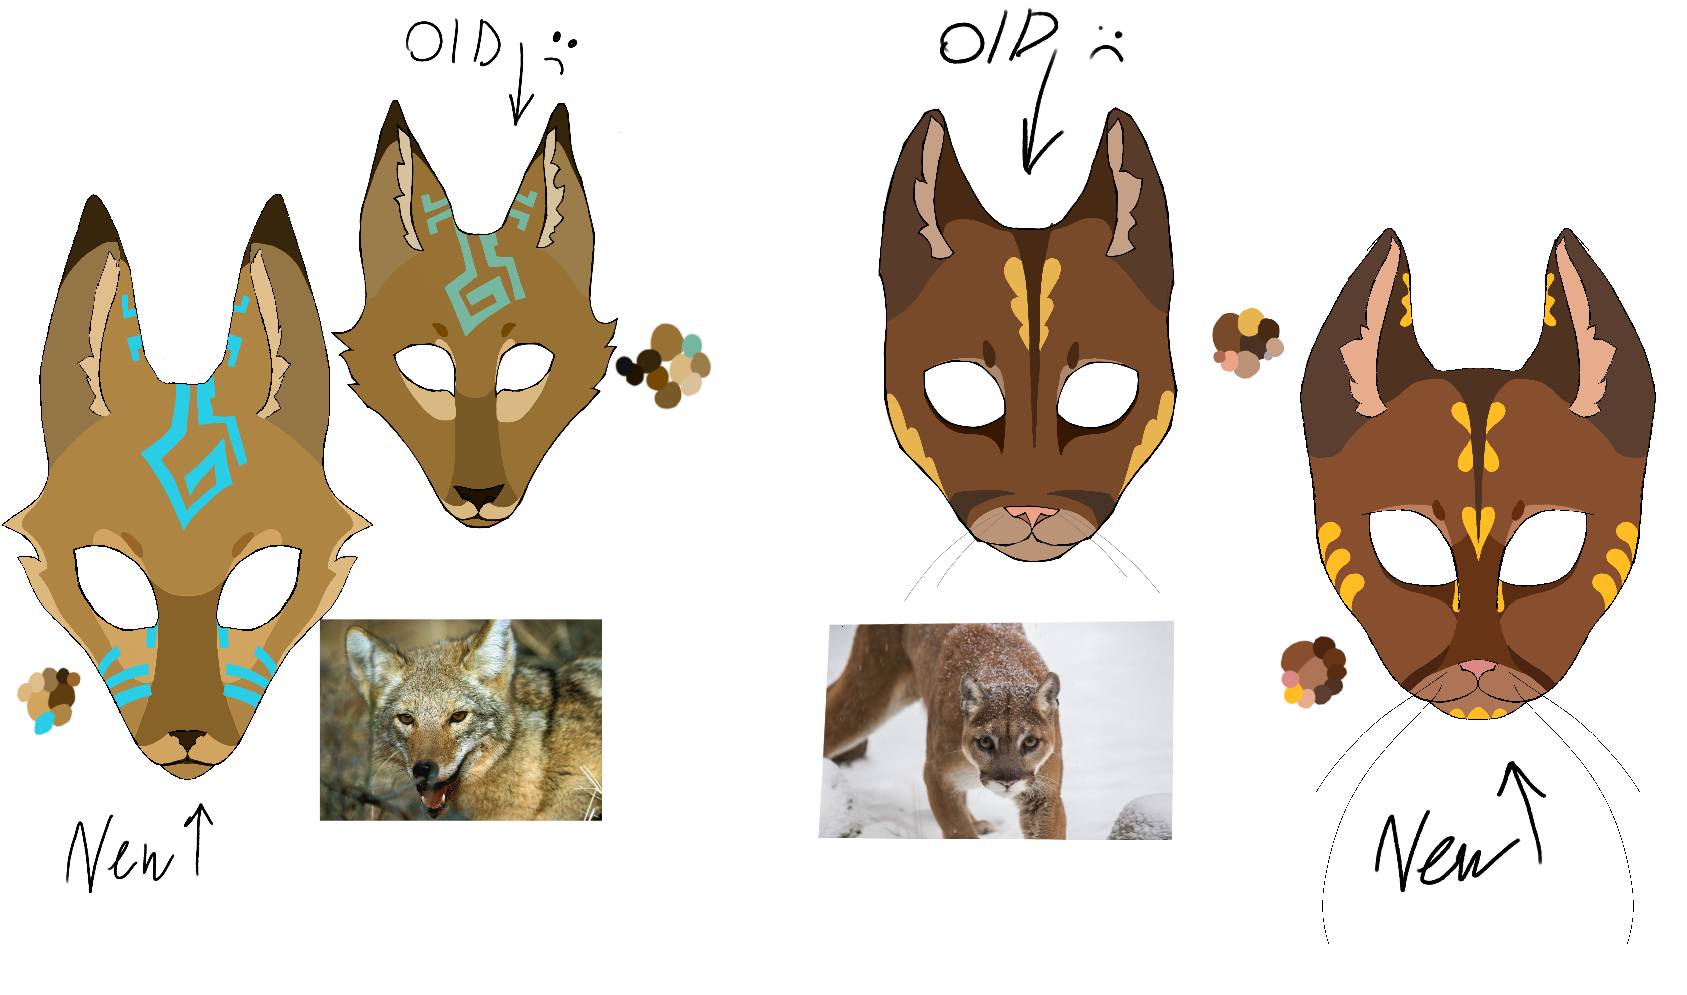 Remake of old therian masks by lulu1001 on DeviantArt